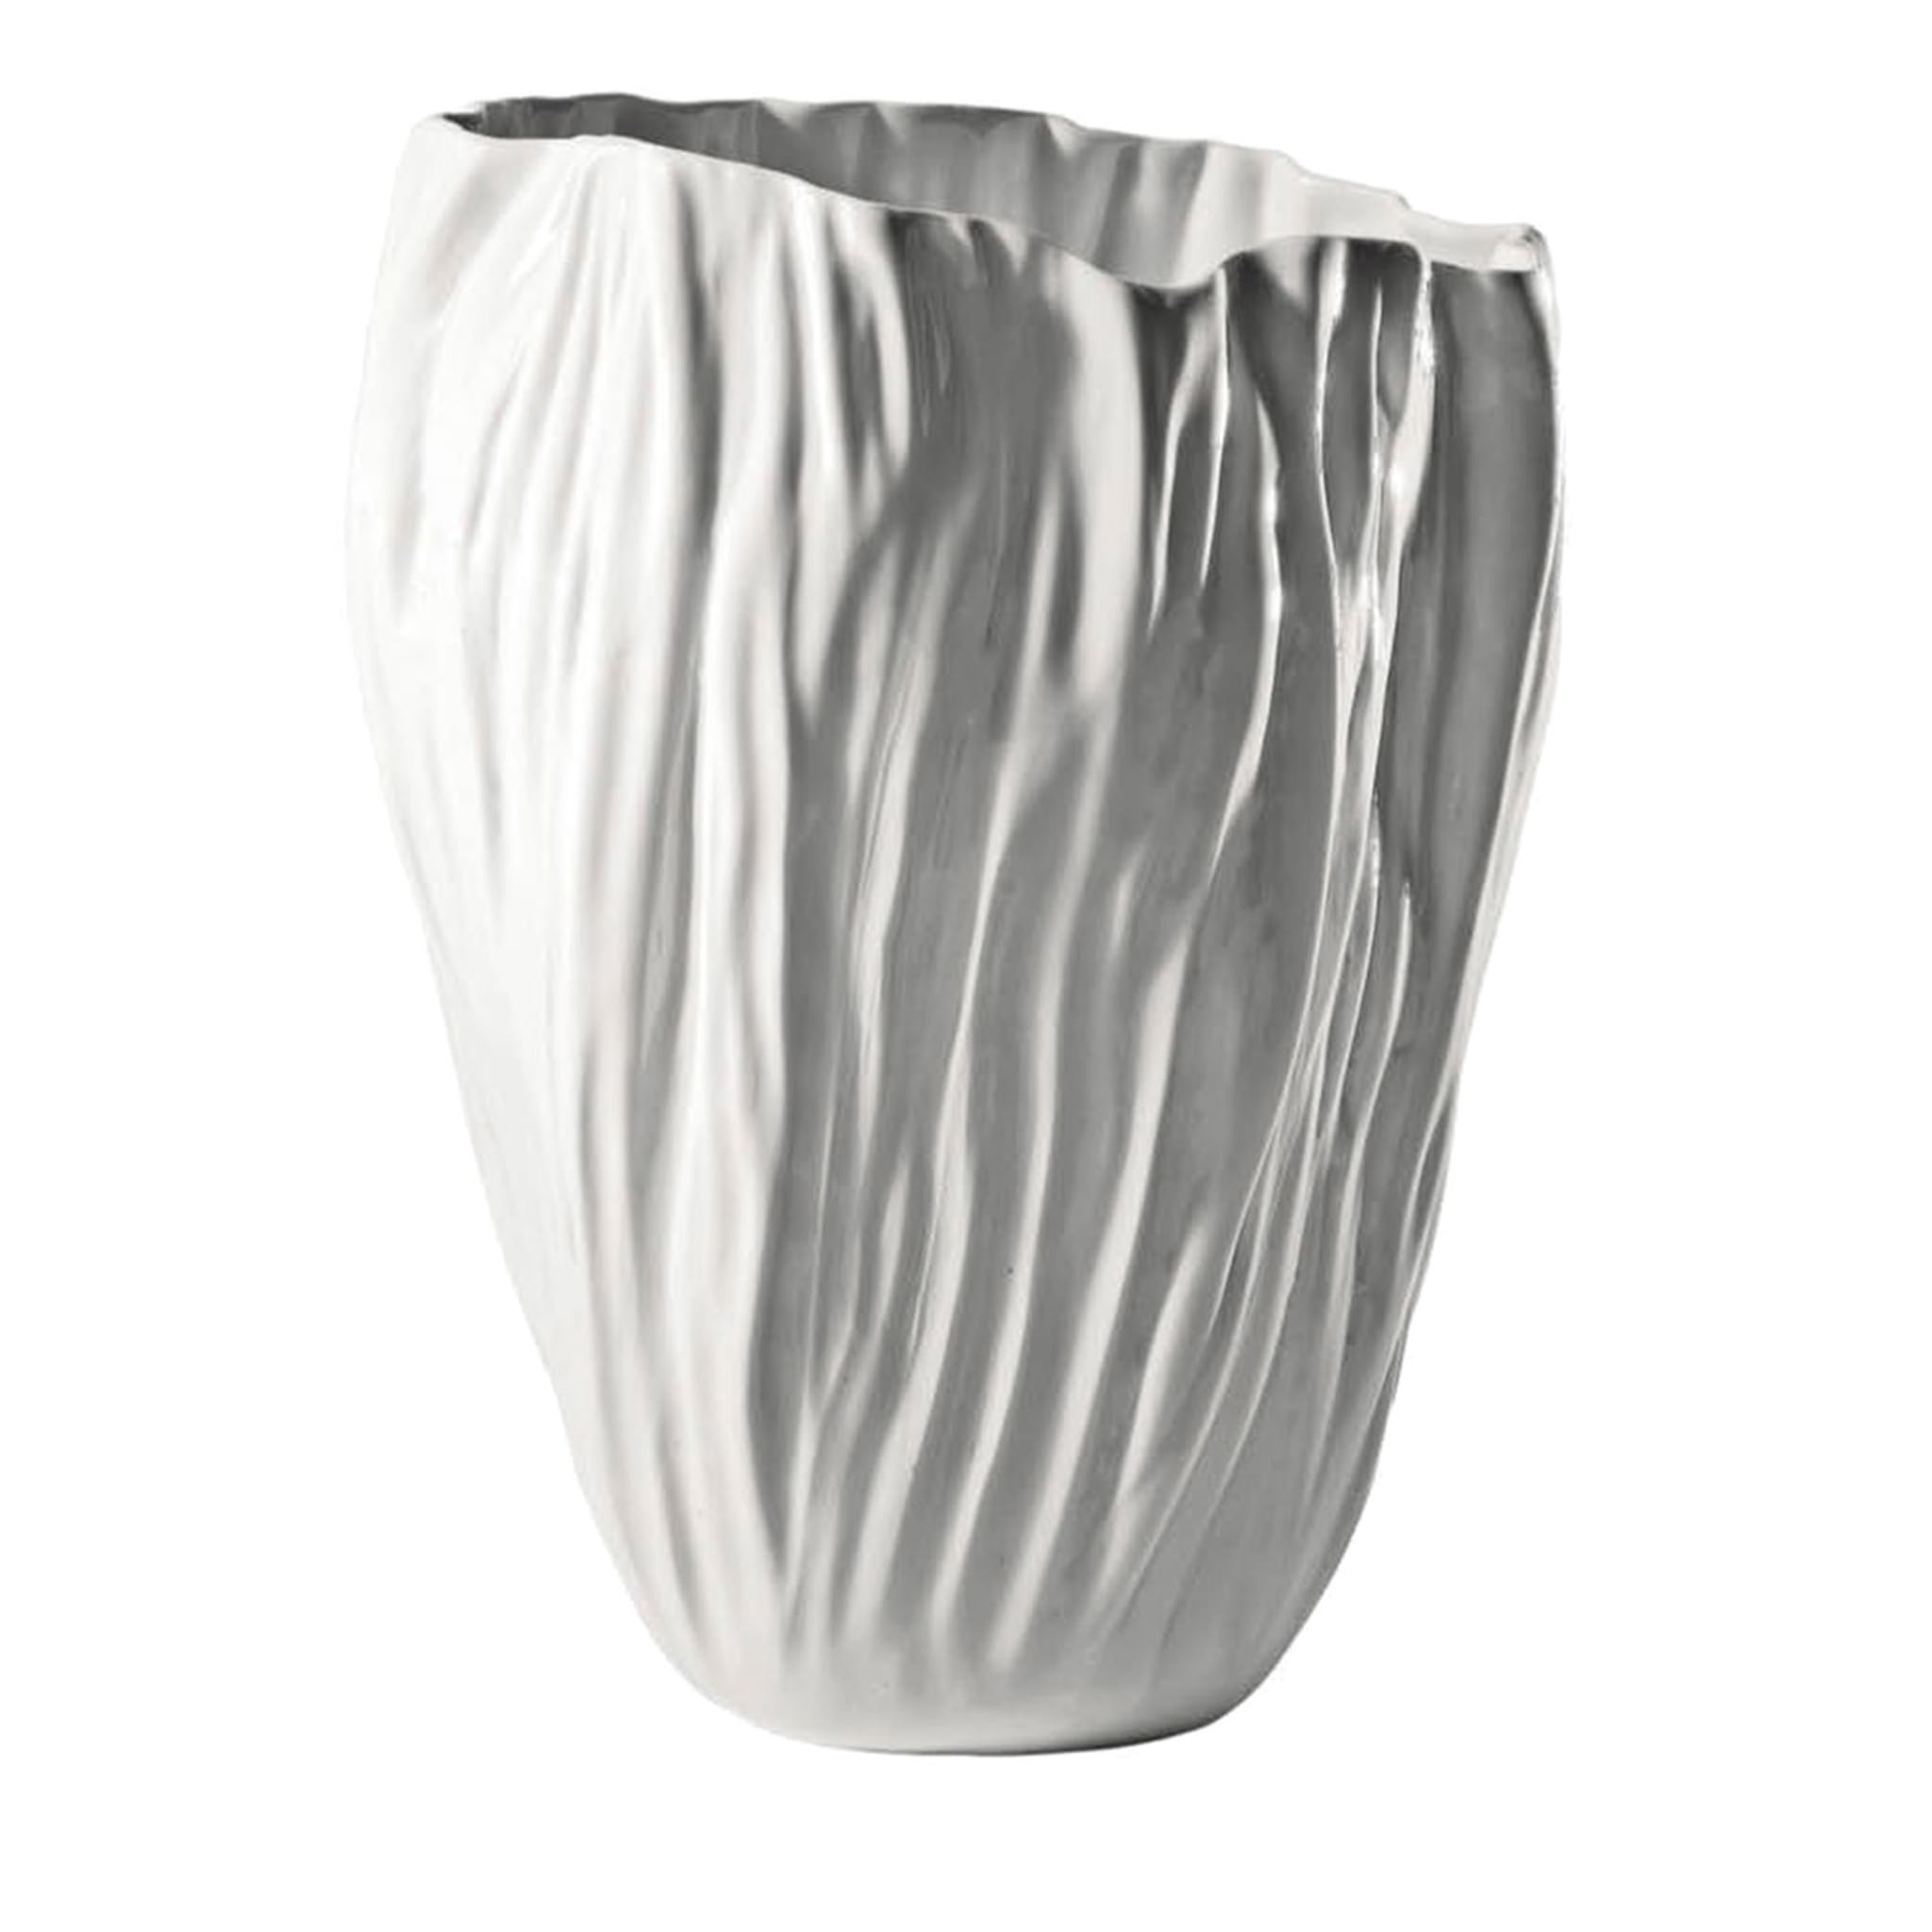 Adelaide Crumpled White Vase by Xie Dong #1 - Main view